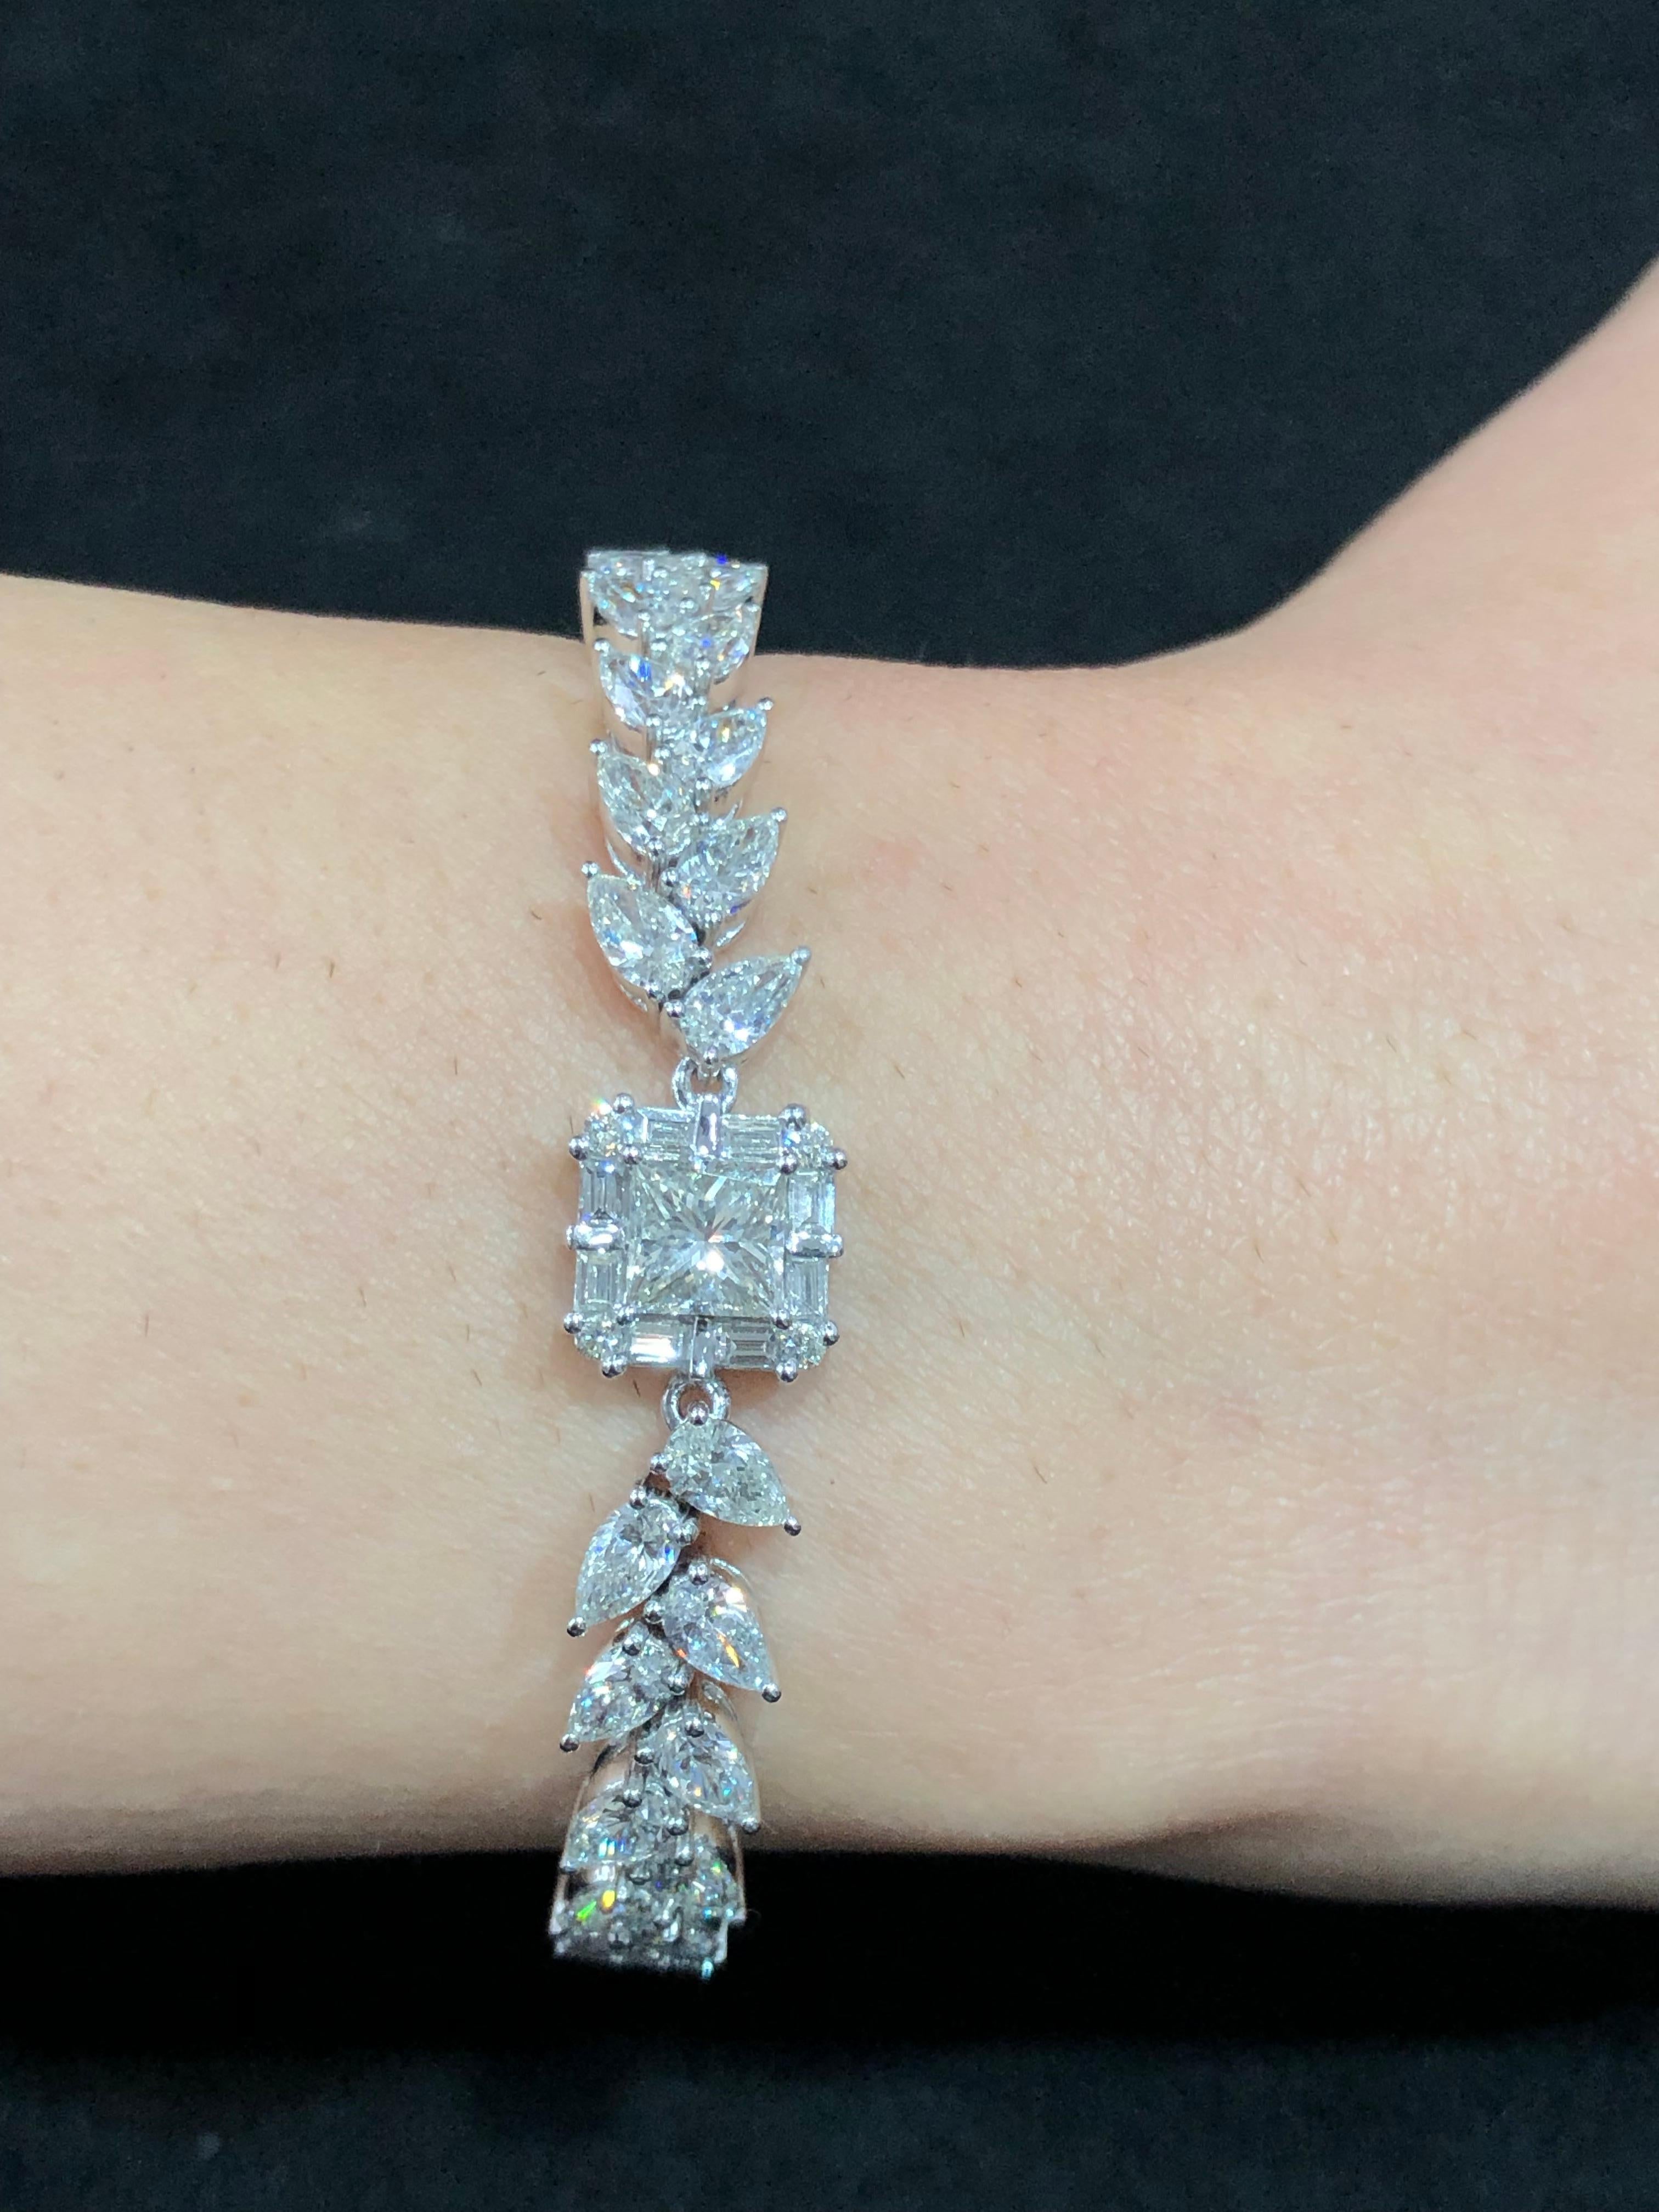 Diamond: 10.07 carat
18kt Gold: 20.906 grams
Ref No: DBR-CFC

Simplicity is the ultimate sophistication! Add this versatile diamond bracelet to your jewellery collection, teaming it up with traditional or modern attire, for both daily wear or